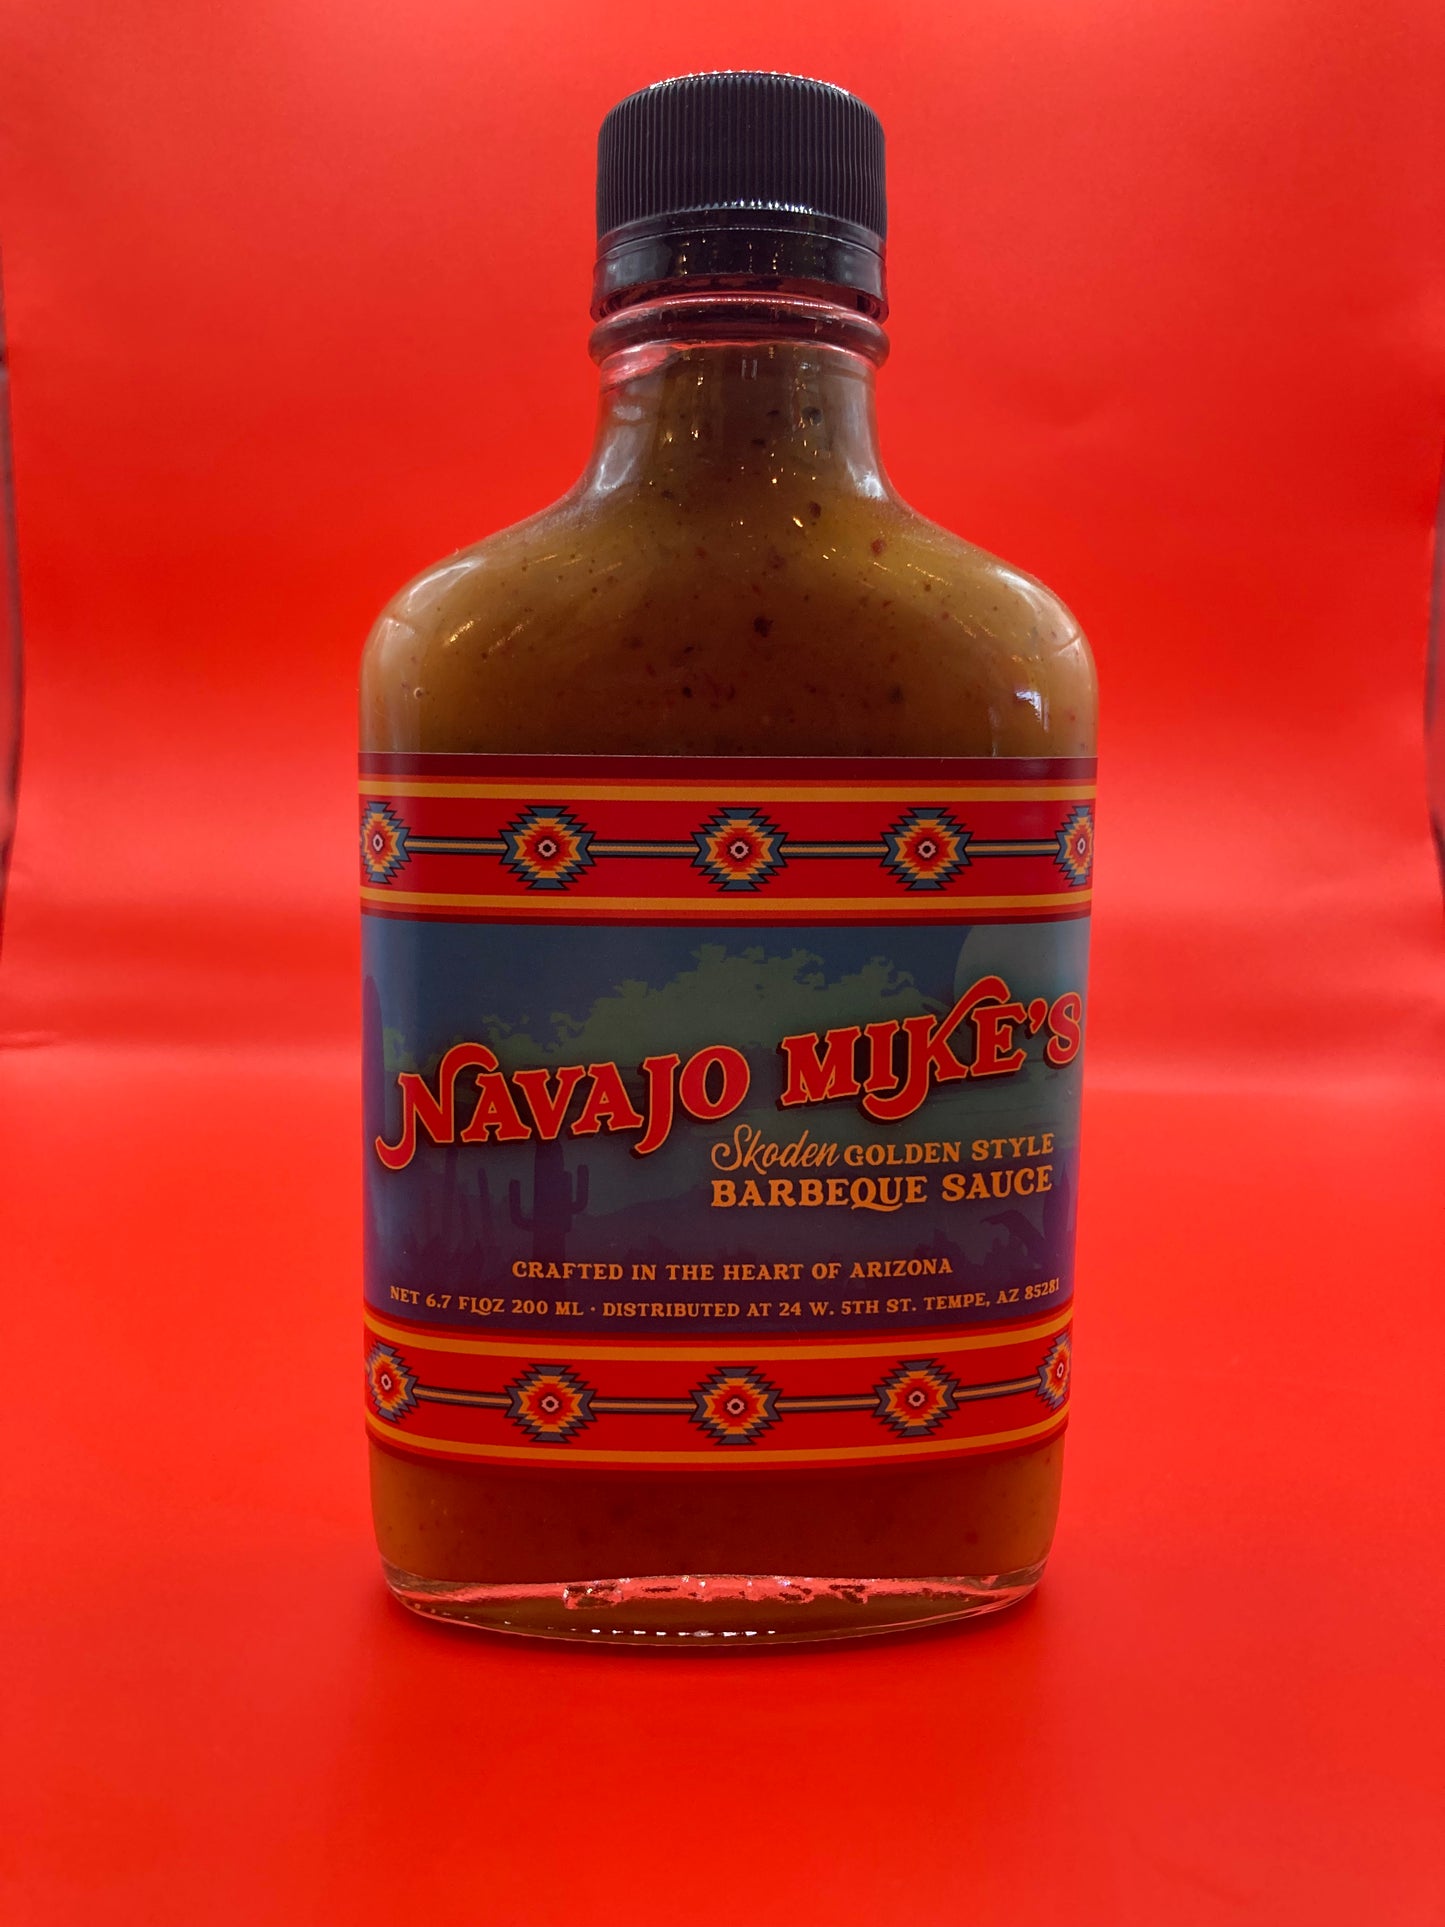 Navajo Mike's Golden Style BBQ Sauce